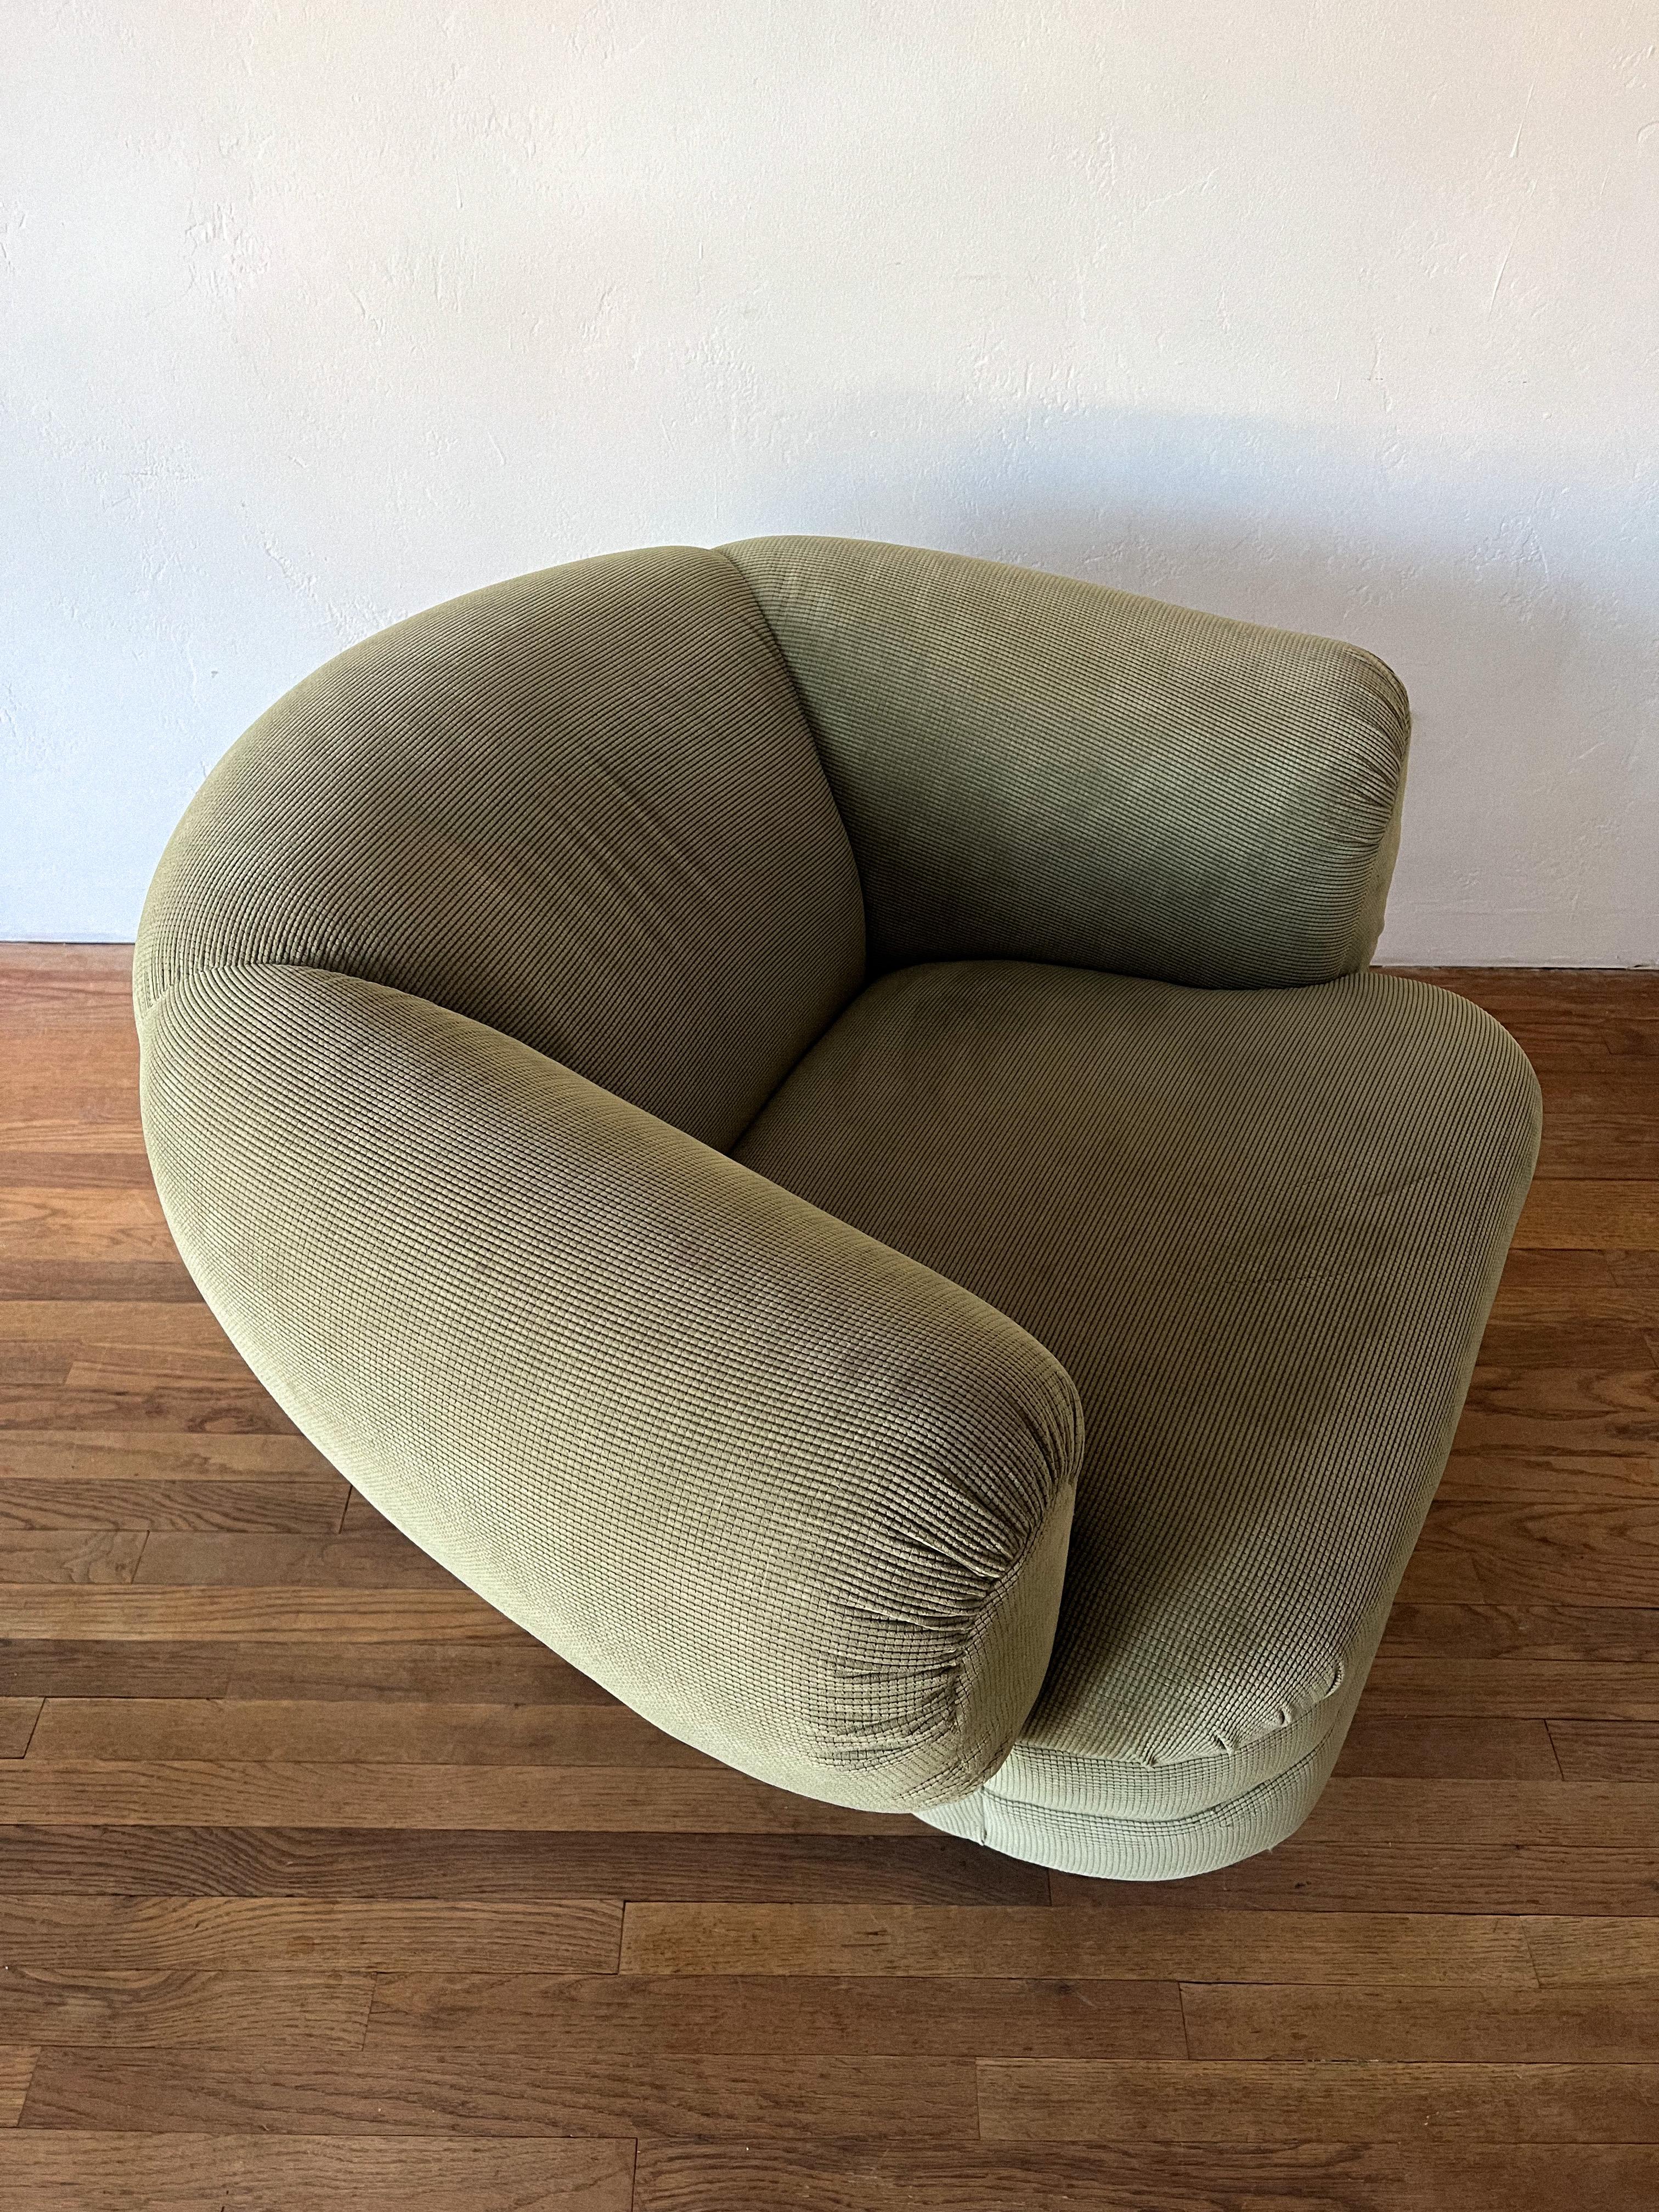 Postmodern swivel and tilt accent chair by Vladimir Kagan for Directional. Curved and oversized with padded arm rests and a wide seat, this chair was made for lounging. Covered in super soft textured velvet in sage green. Unmarked.